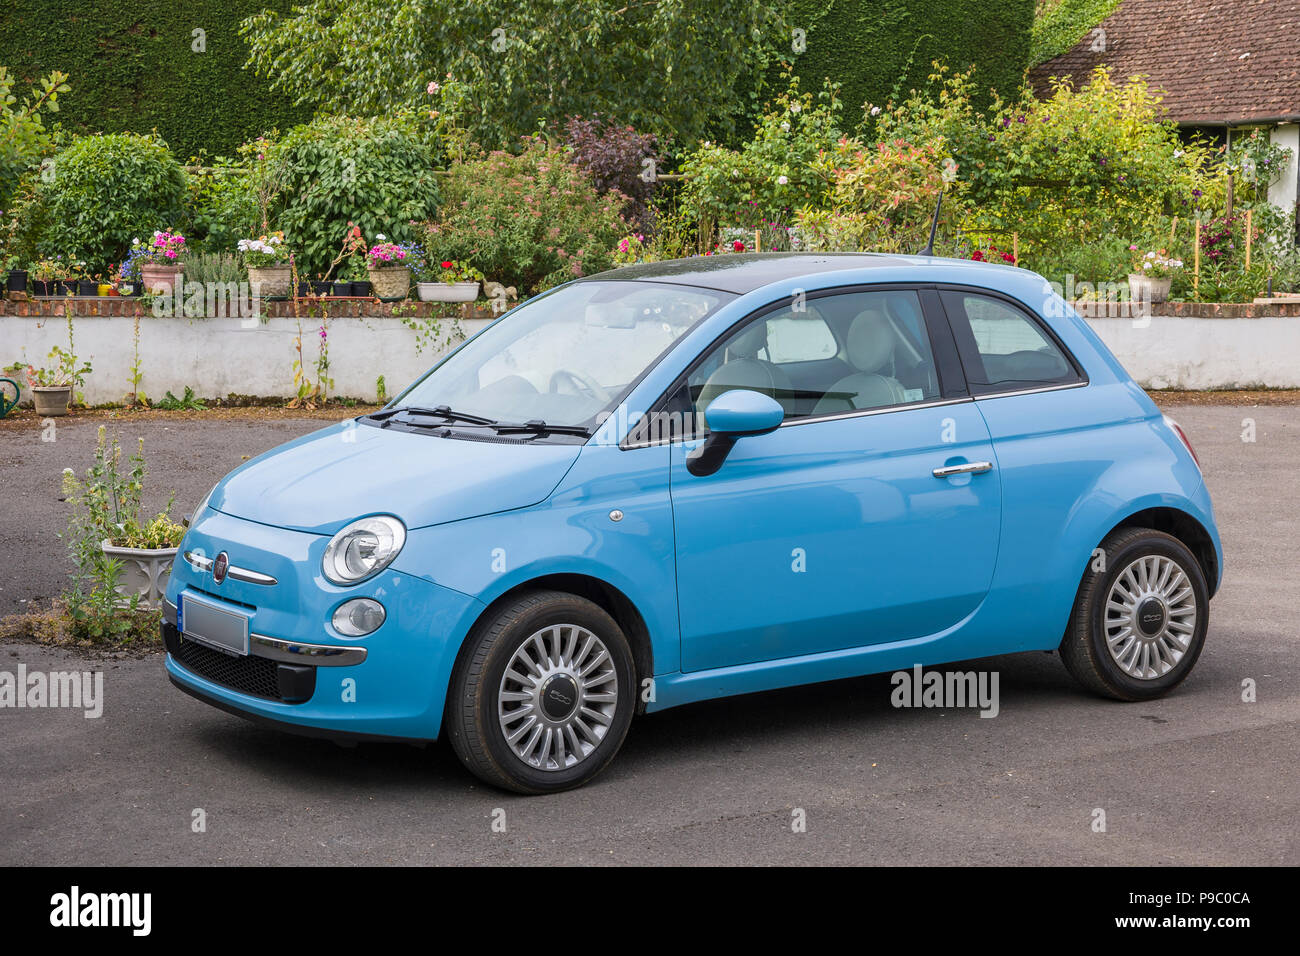 Side view of Fiat 500 mini car in UK with identification number plate partly obscured for security reasons Stock Photo